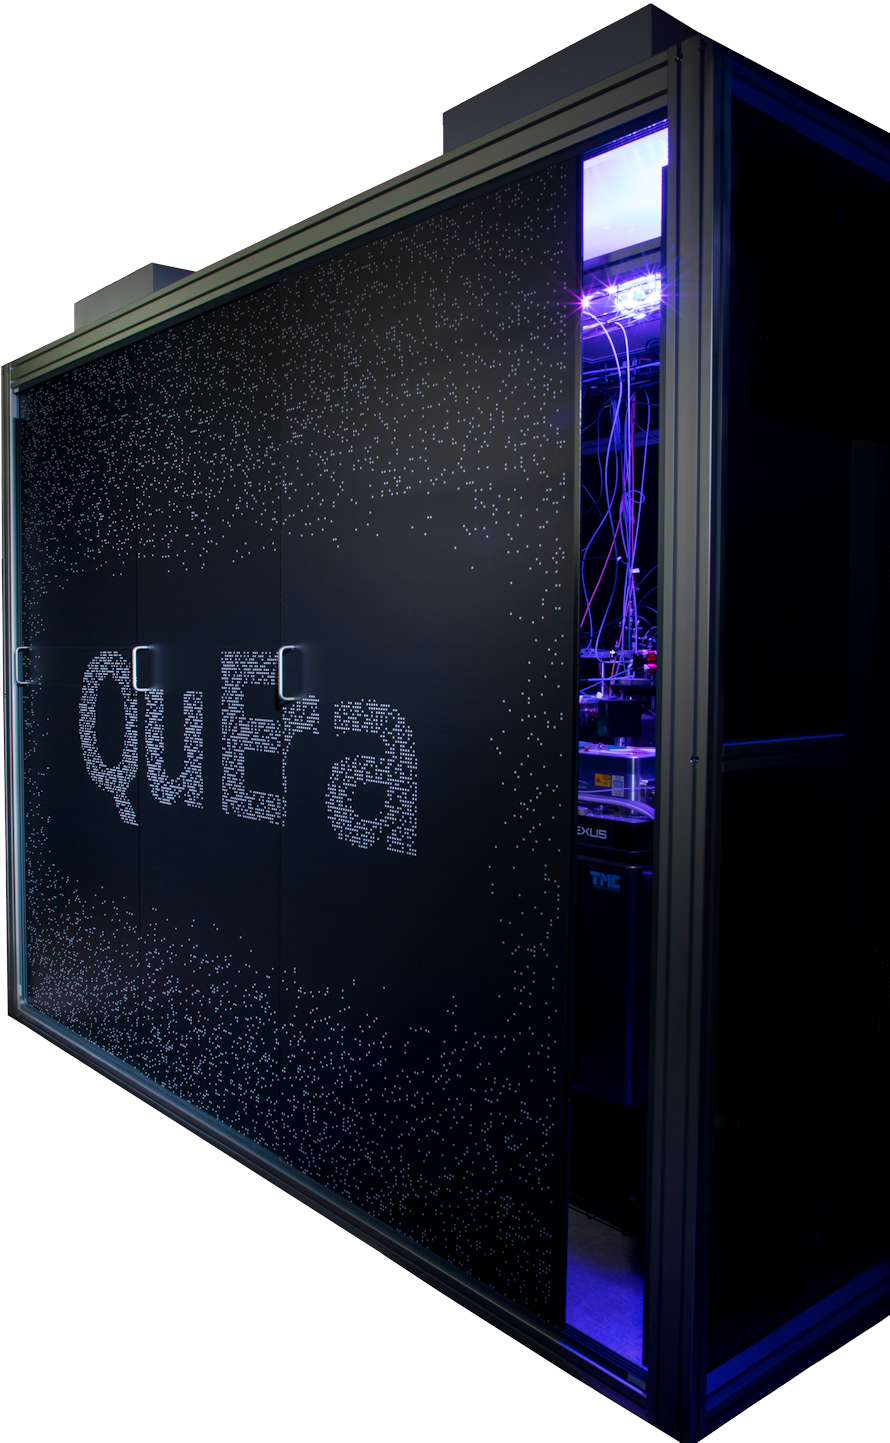 Quera Expands Quantum Computing Capabilities In Collaboration With National Energy Research Scientific Computing Center (Nersc)